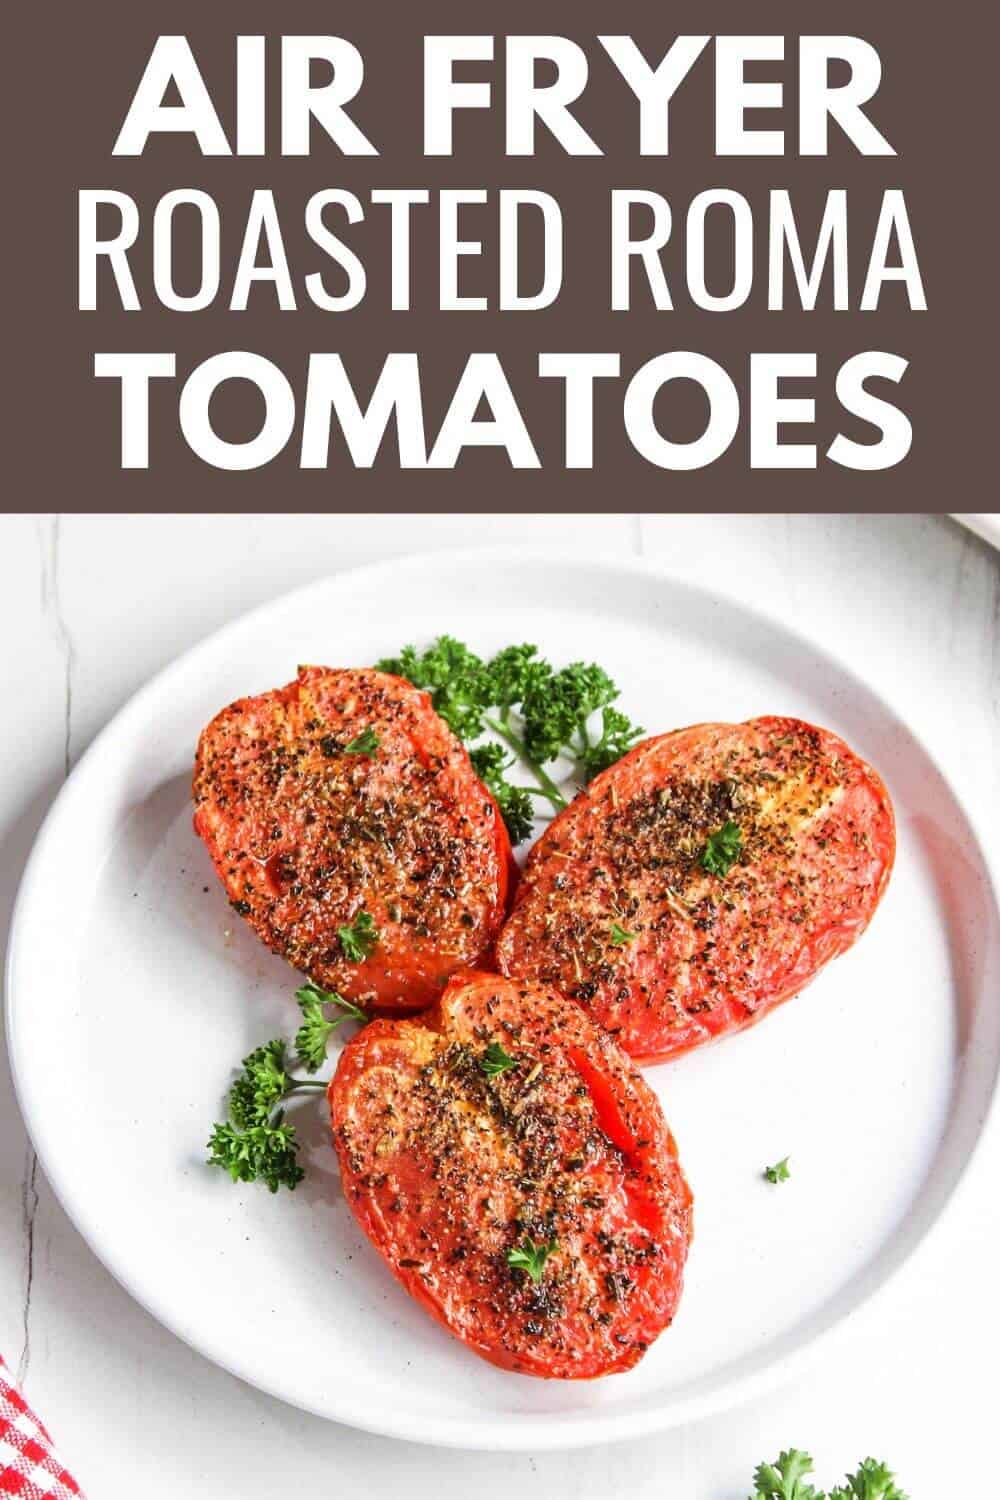 Air fryer roasted roma tomatoes on a plate.